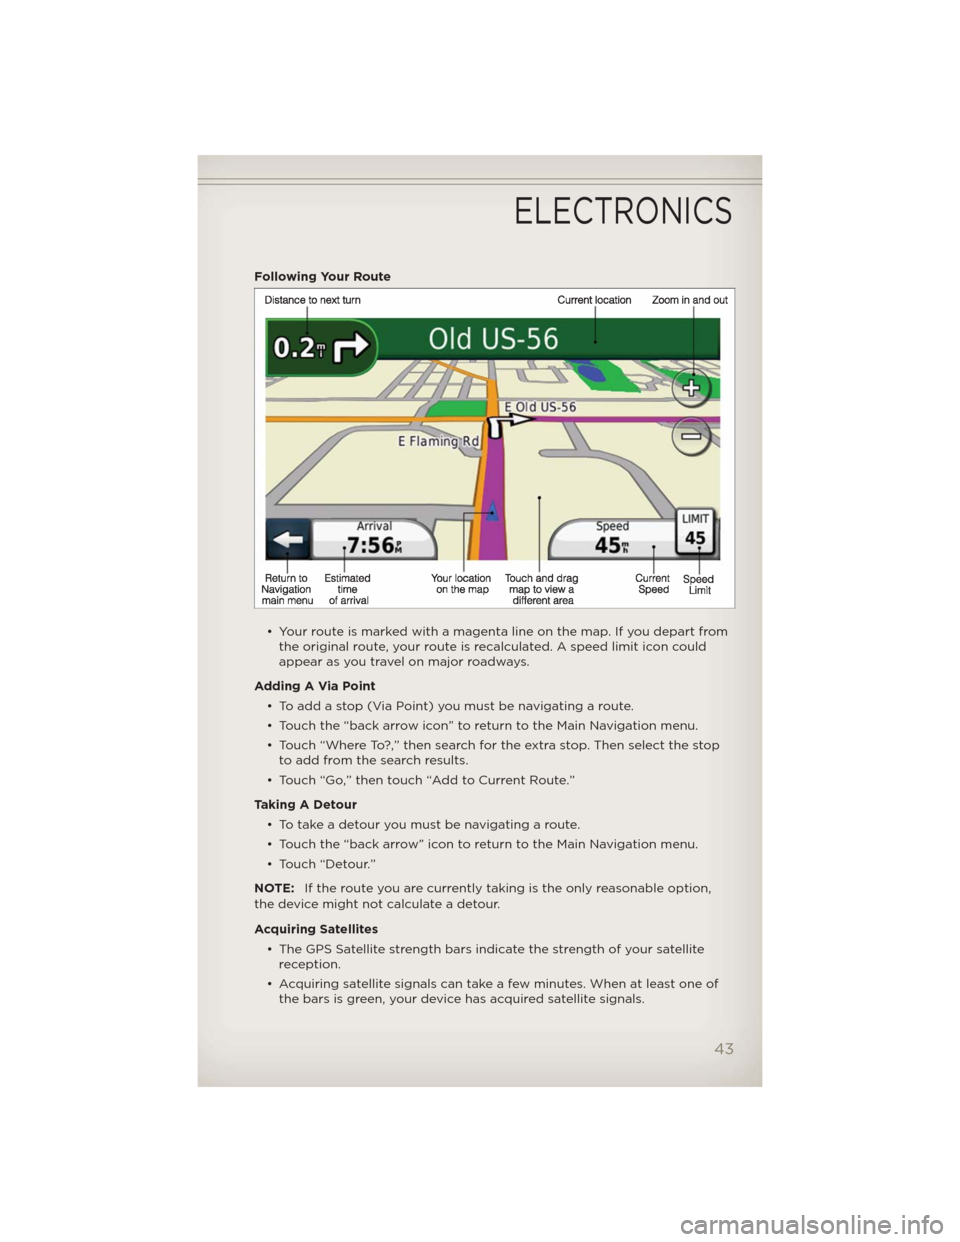 JEEP PATRIOT 2012 1.G User Guide Following Your Route
• Your route is marked with a magenta line on the map. If you depart from
the original route, your route is recalculated. A speed limit icon could
appear as you travel on major 